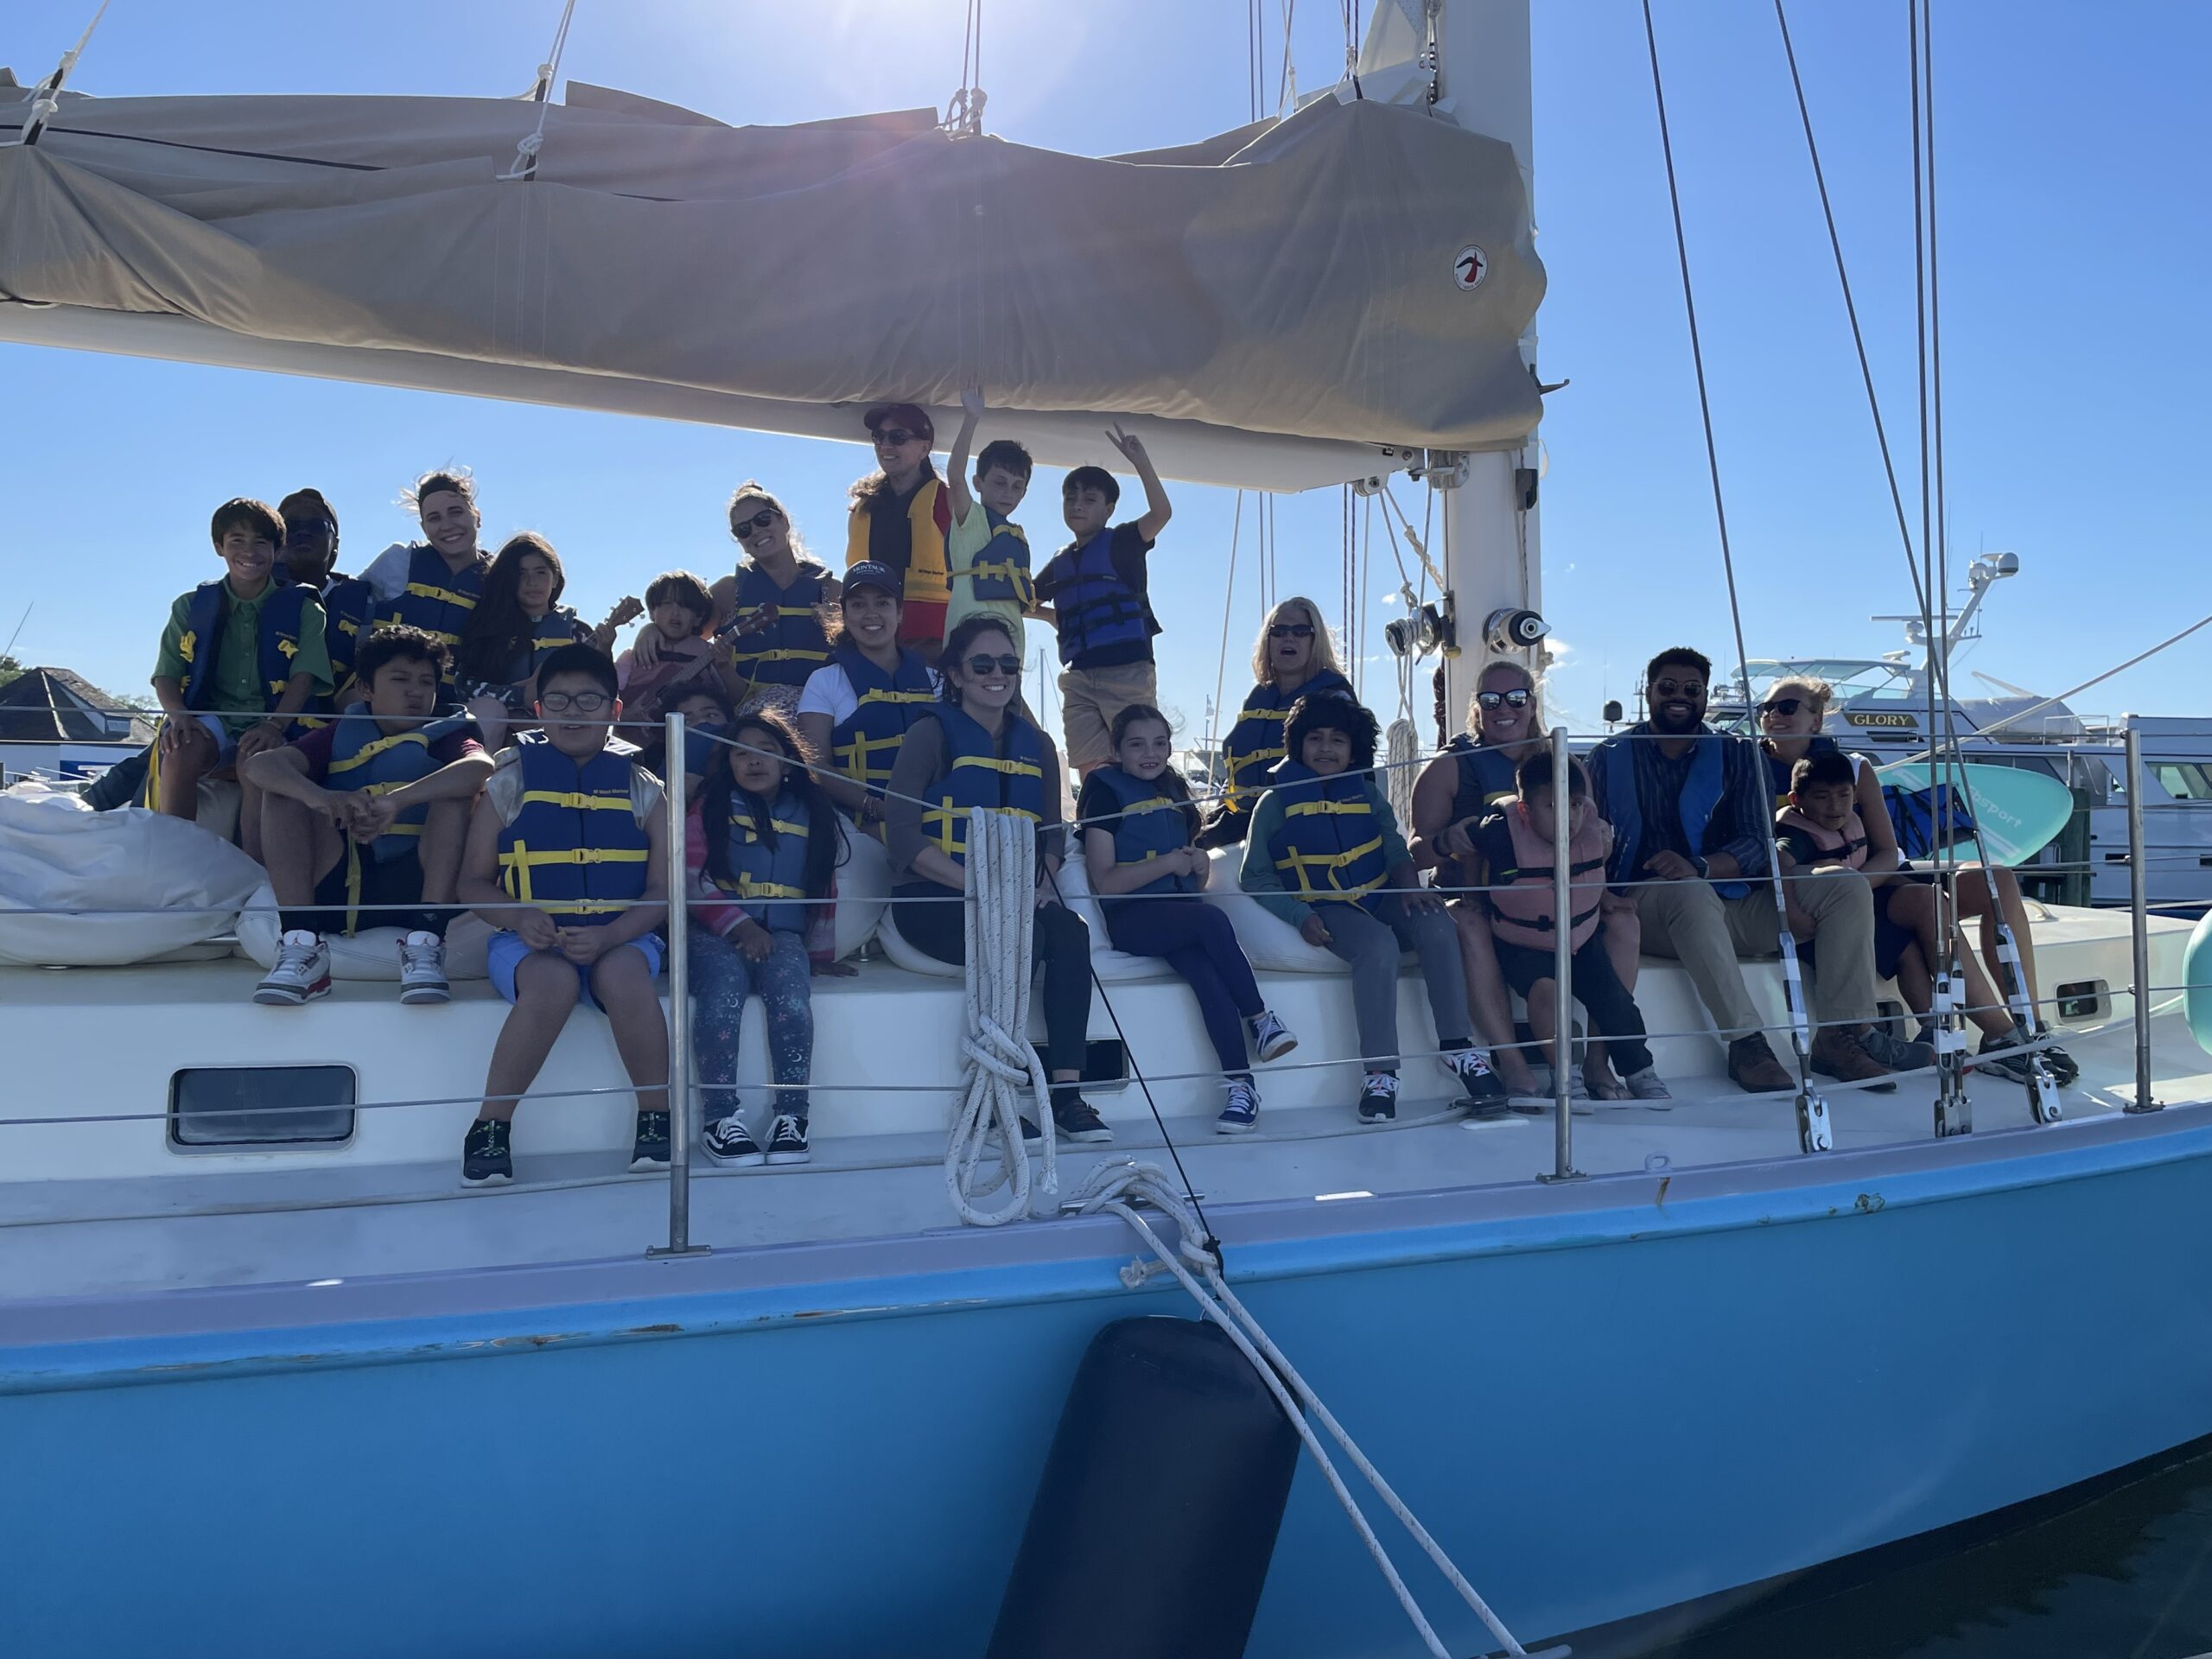 The Springs School NYS Mentoring program enjoyed a culminating event on The Luna last week. Each year staff volunteer to meet with a student one-on-one once a week. Each year for the last three years, the school ends the mentoring program with a special  sailing trip.